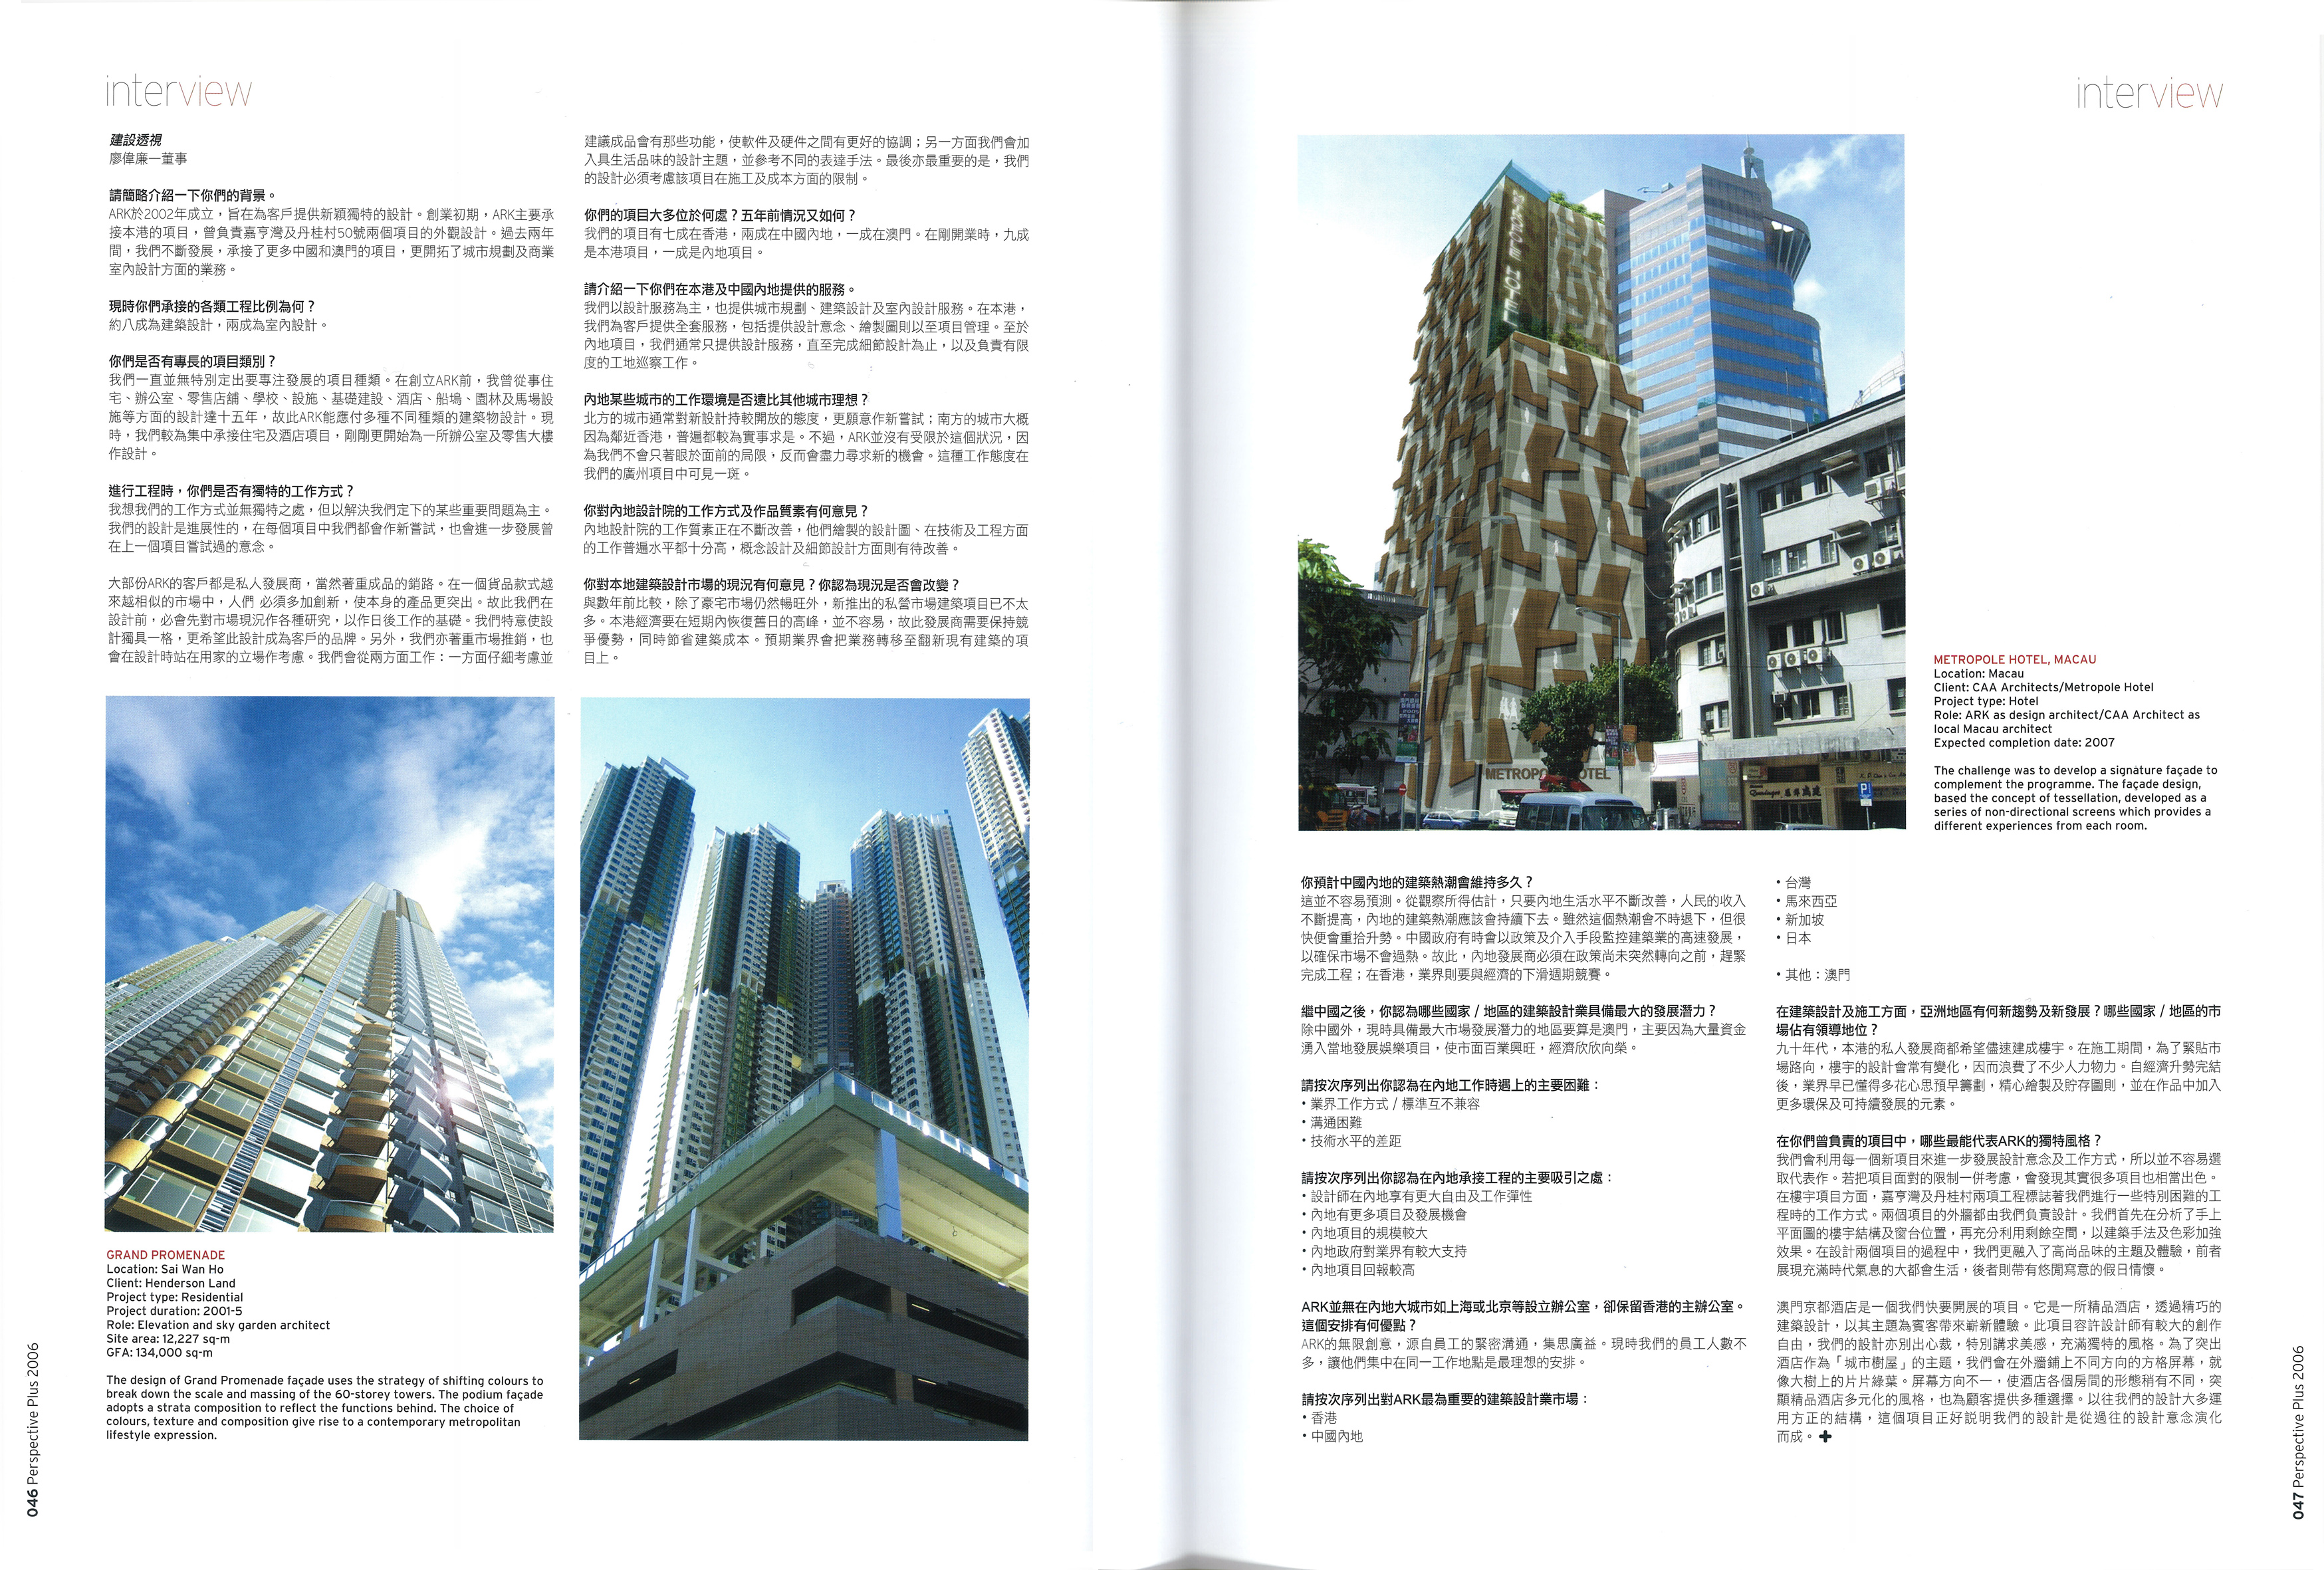 PERSPECTIVE PLUS (2006 EDITION), “INTERVIEW AND FEATURE OF 20 ARCHITECTURAL LEADERS IN GREATER CHINA”